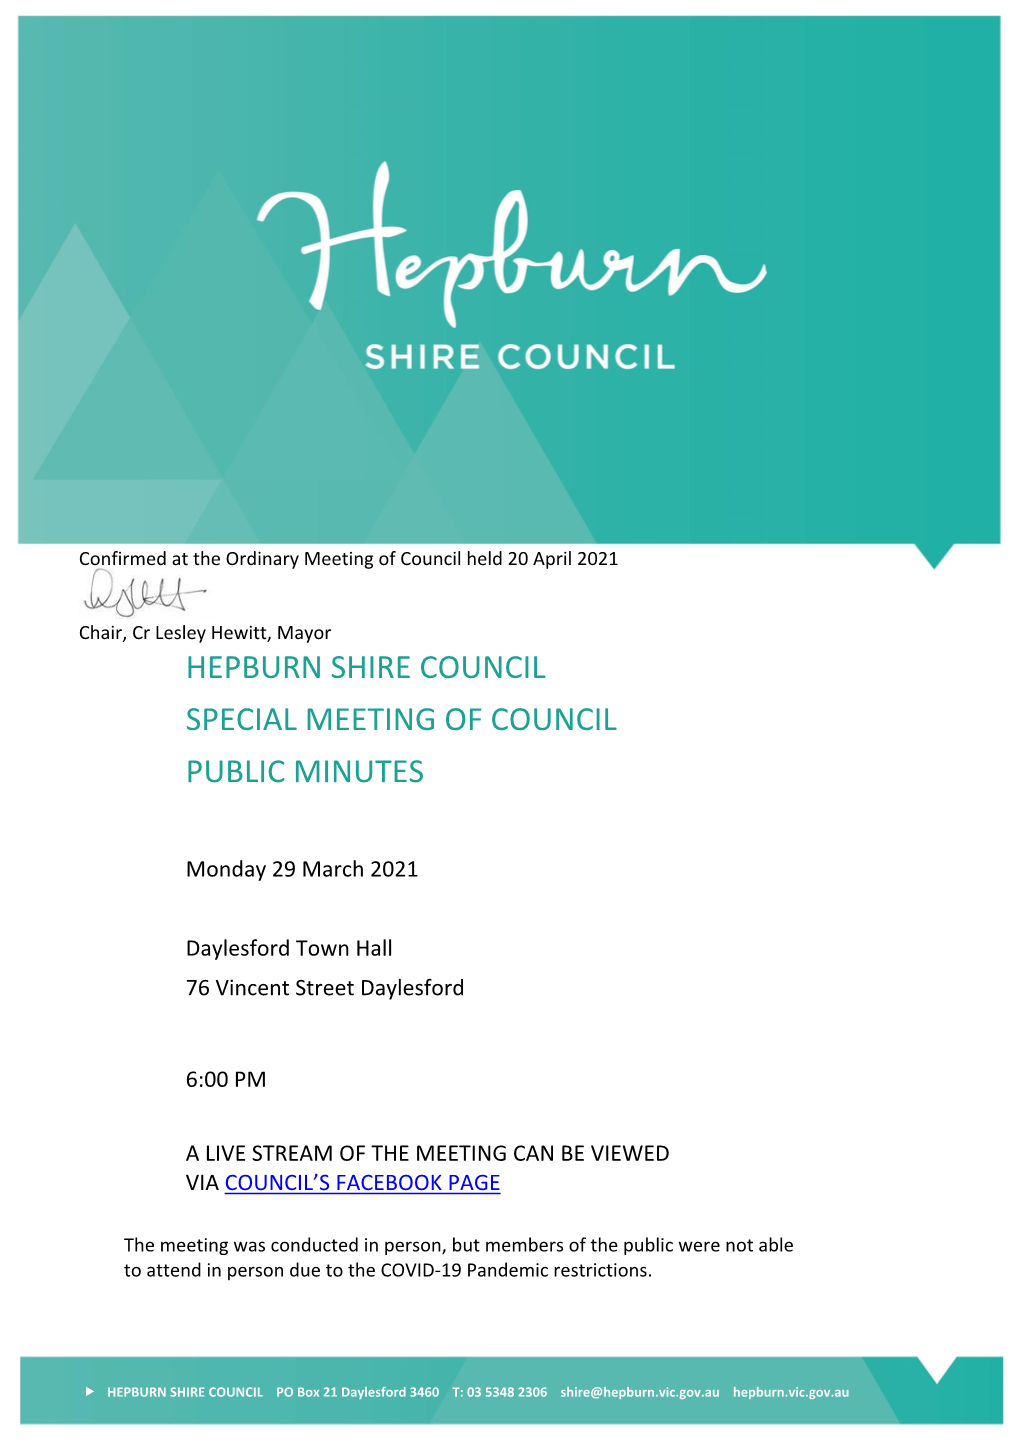 Special Meeting of Council Public Minutes